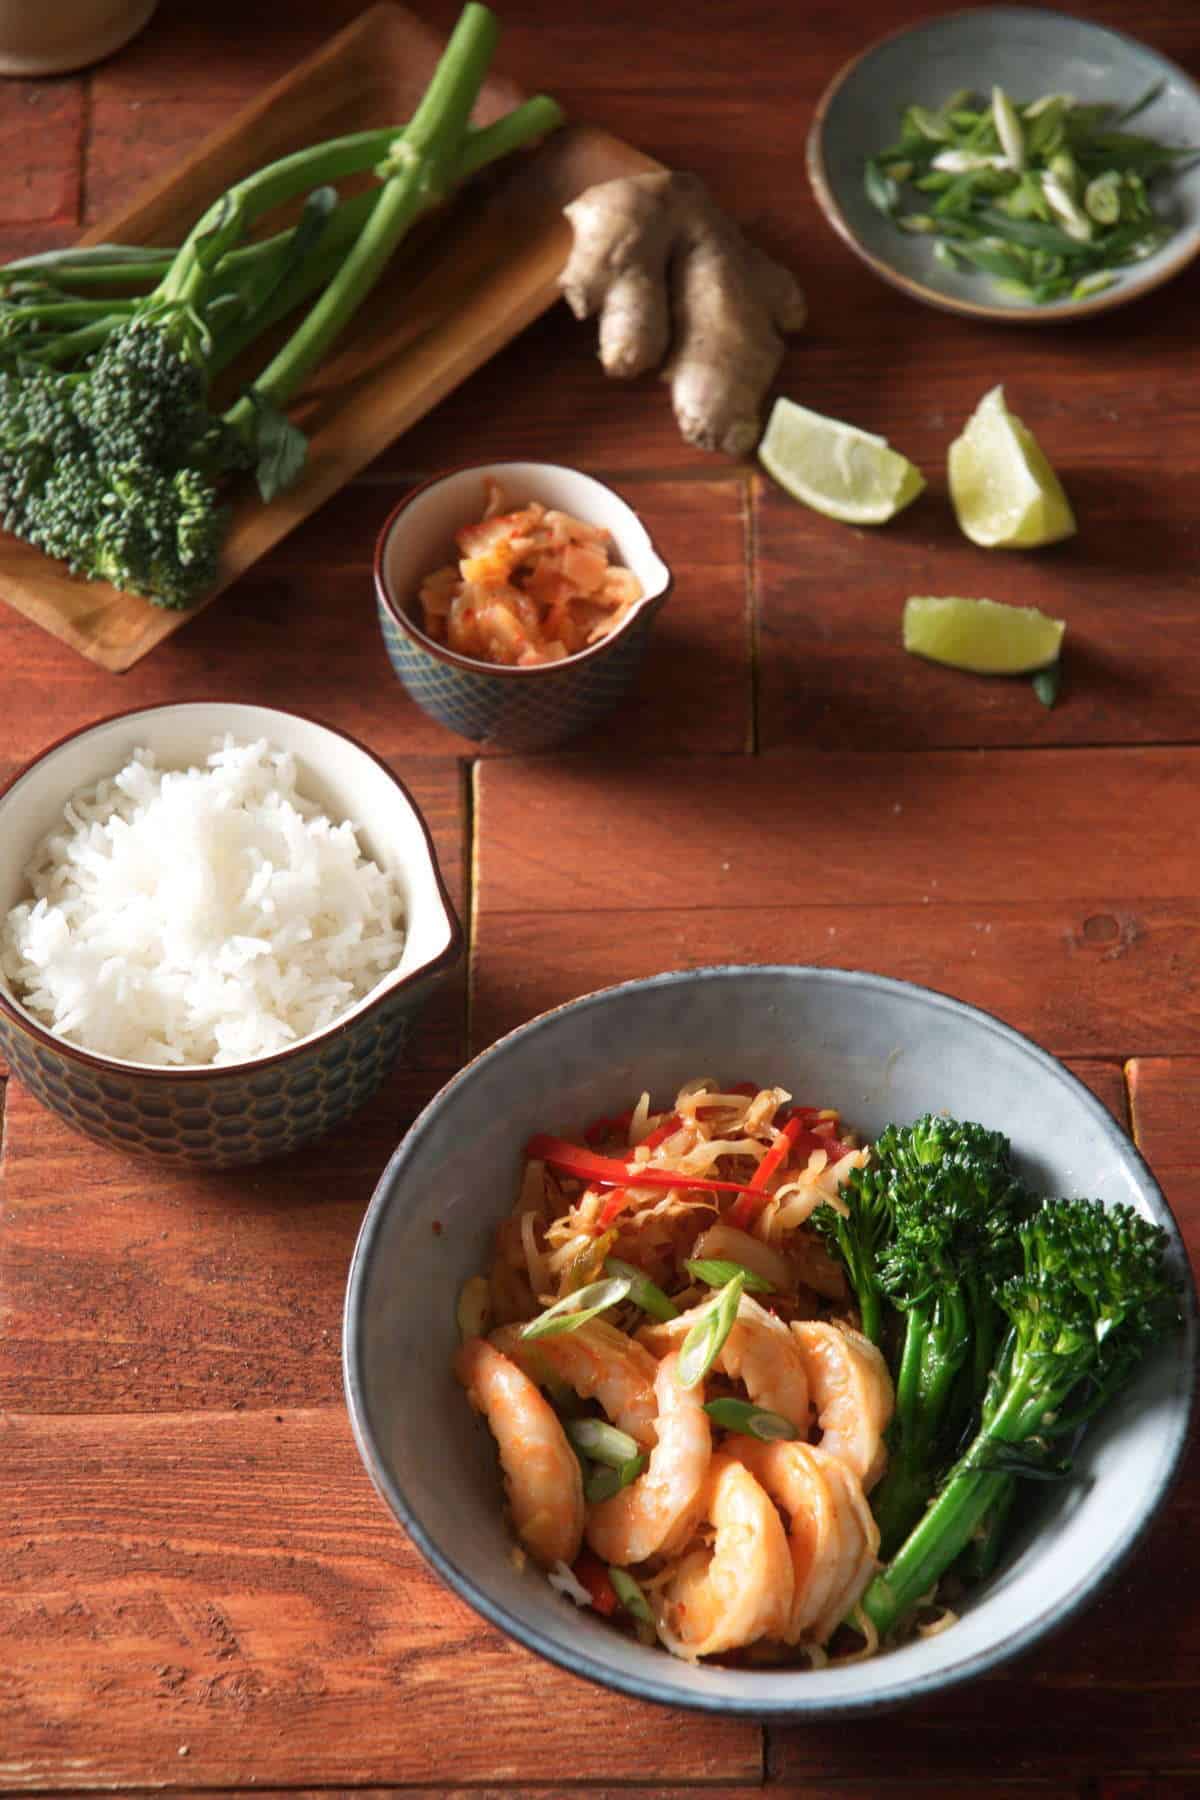 Kimchi shrimp stir fry over rice in a bowl on wooden background.